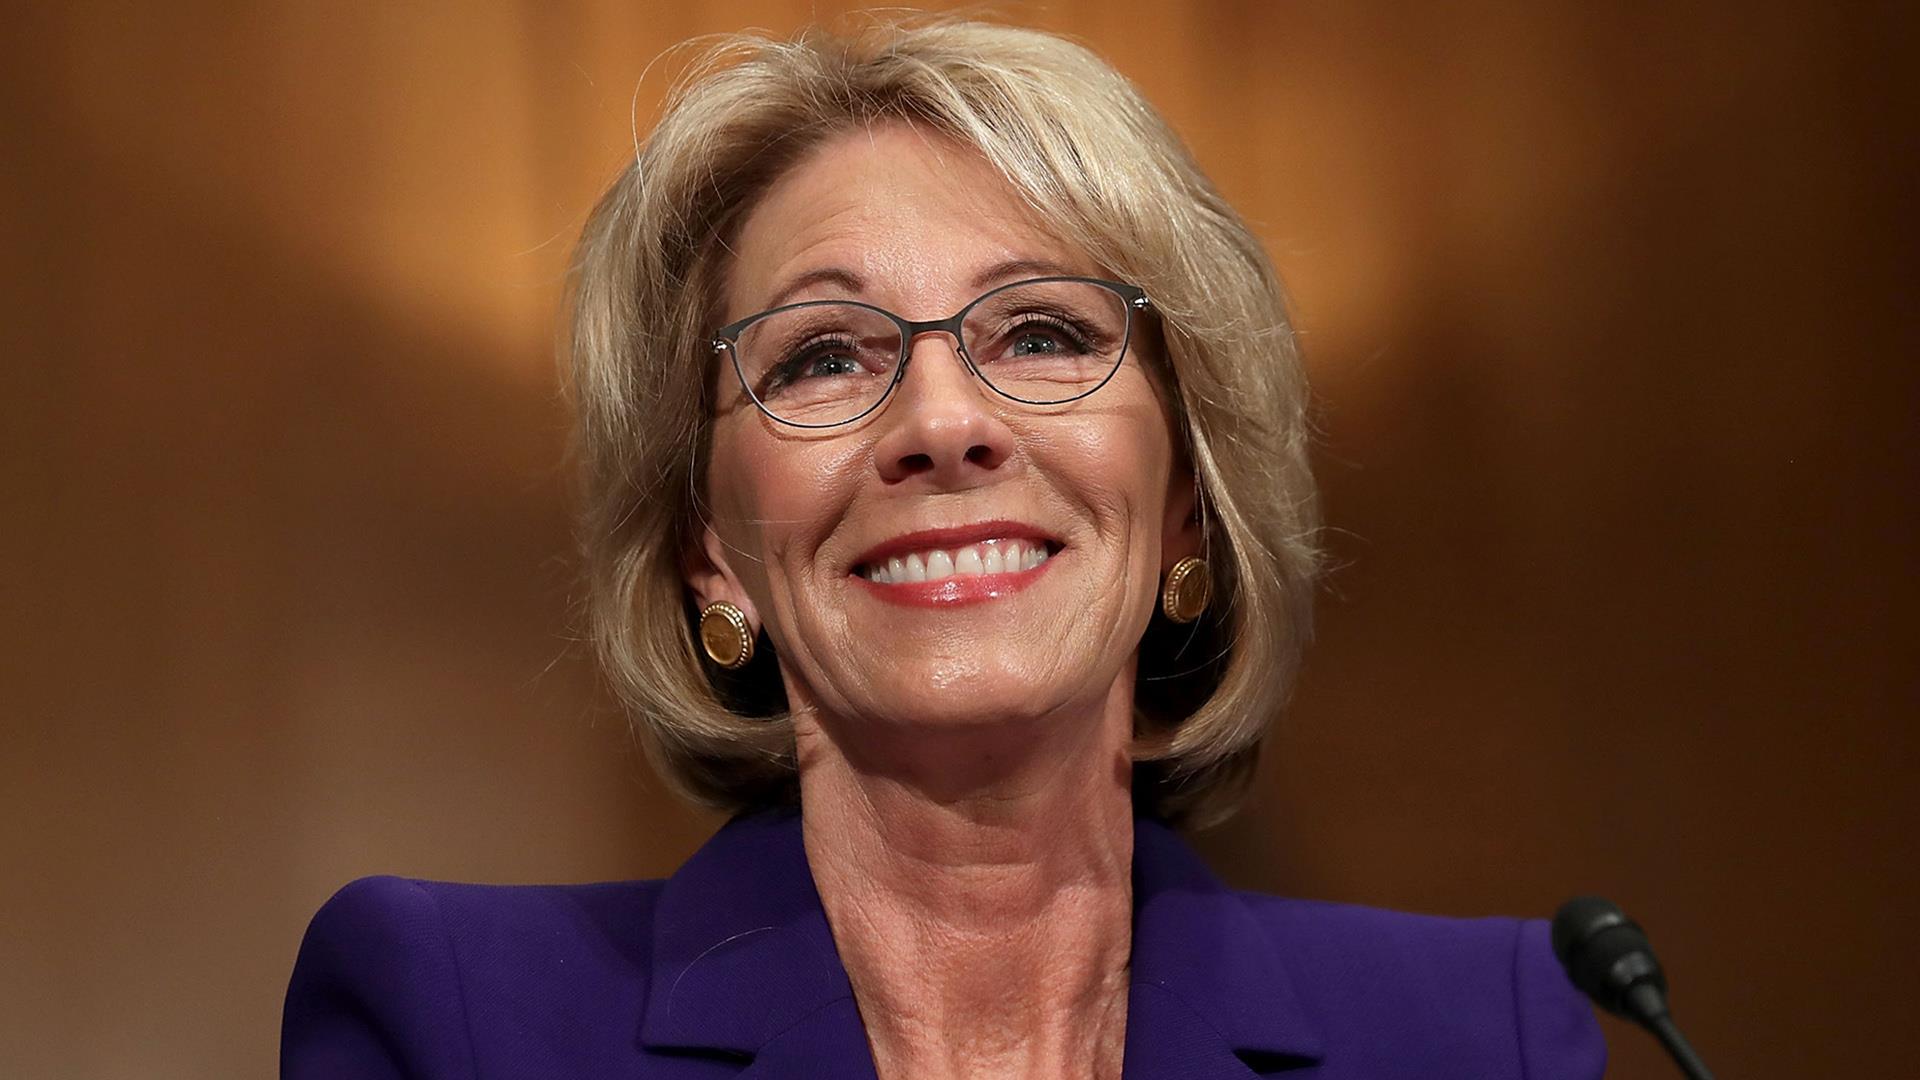 Betsy DeVos nomination for Secretary of Education may be in jeopardy